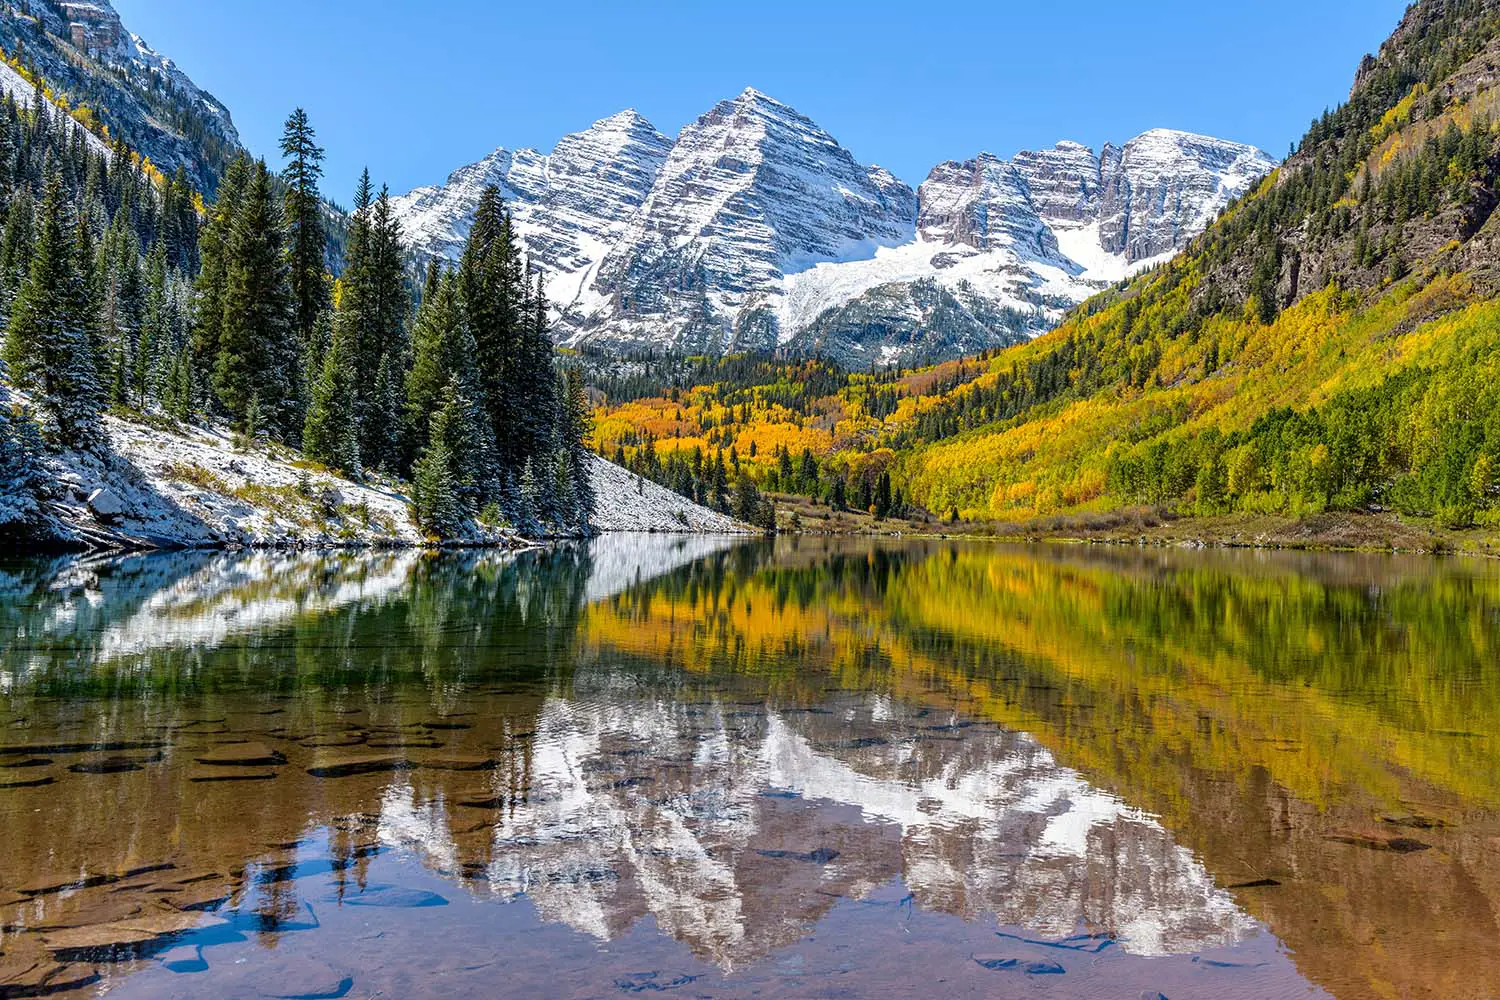 Maroon Bells and Maroon Lake - A wide-angle autumn midday view of snow coated Maroon Bells reflecting in crystal clear Maroon Lake, Aspen, Colorado, USA.